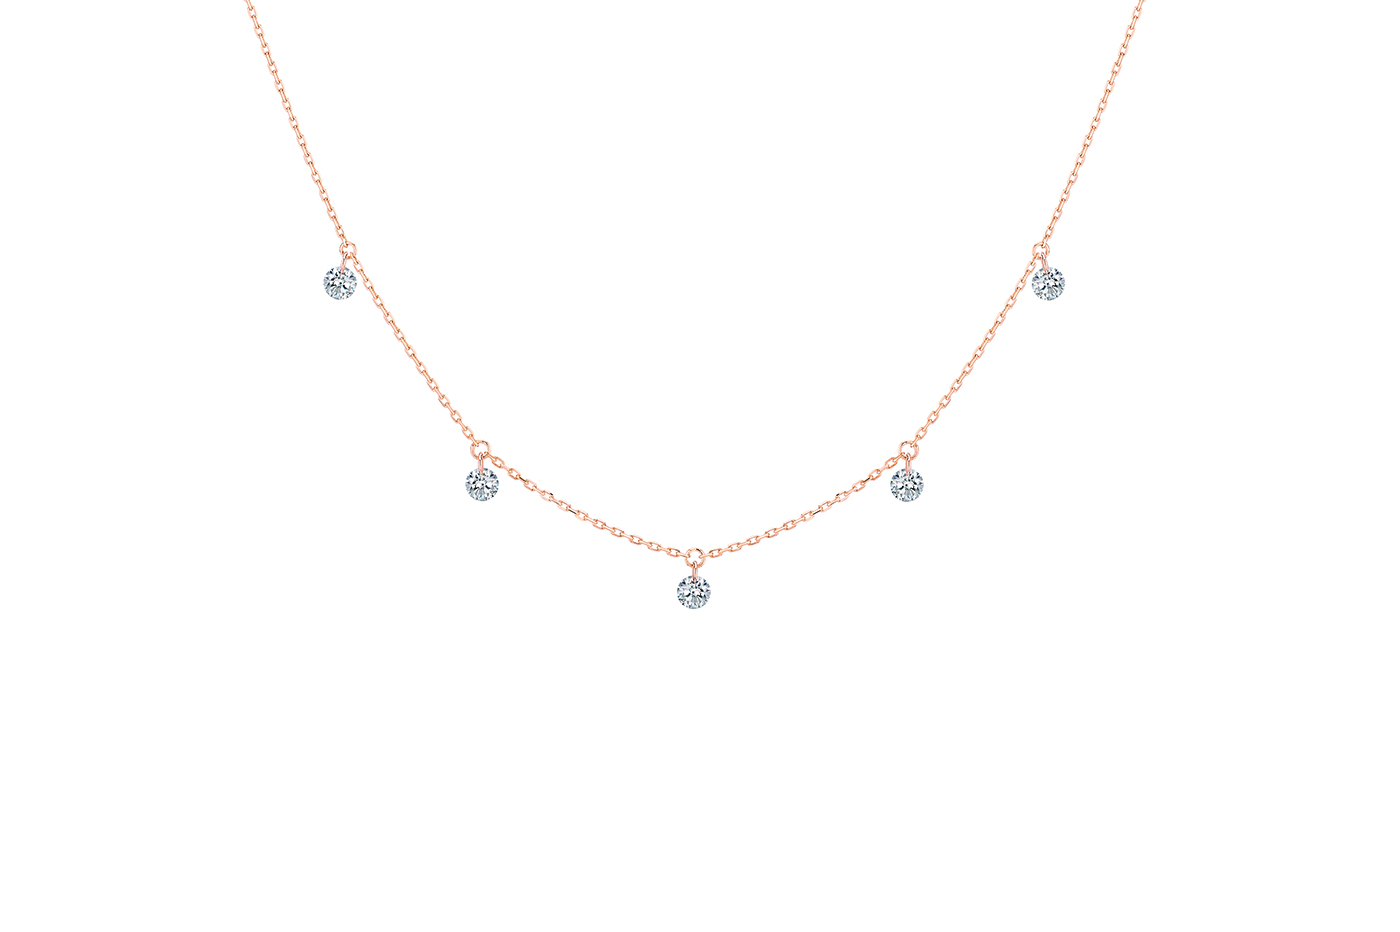 Collier 360° - 5 diamants, poids total 0,35 ct approx., or 18KT, 1gr.